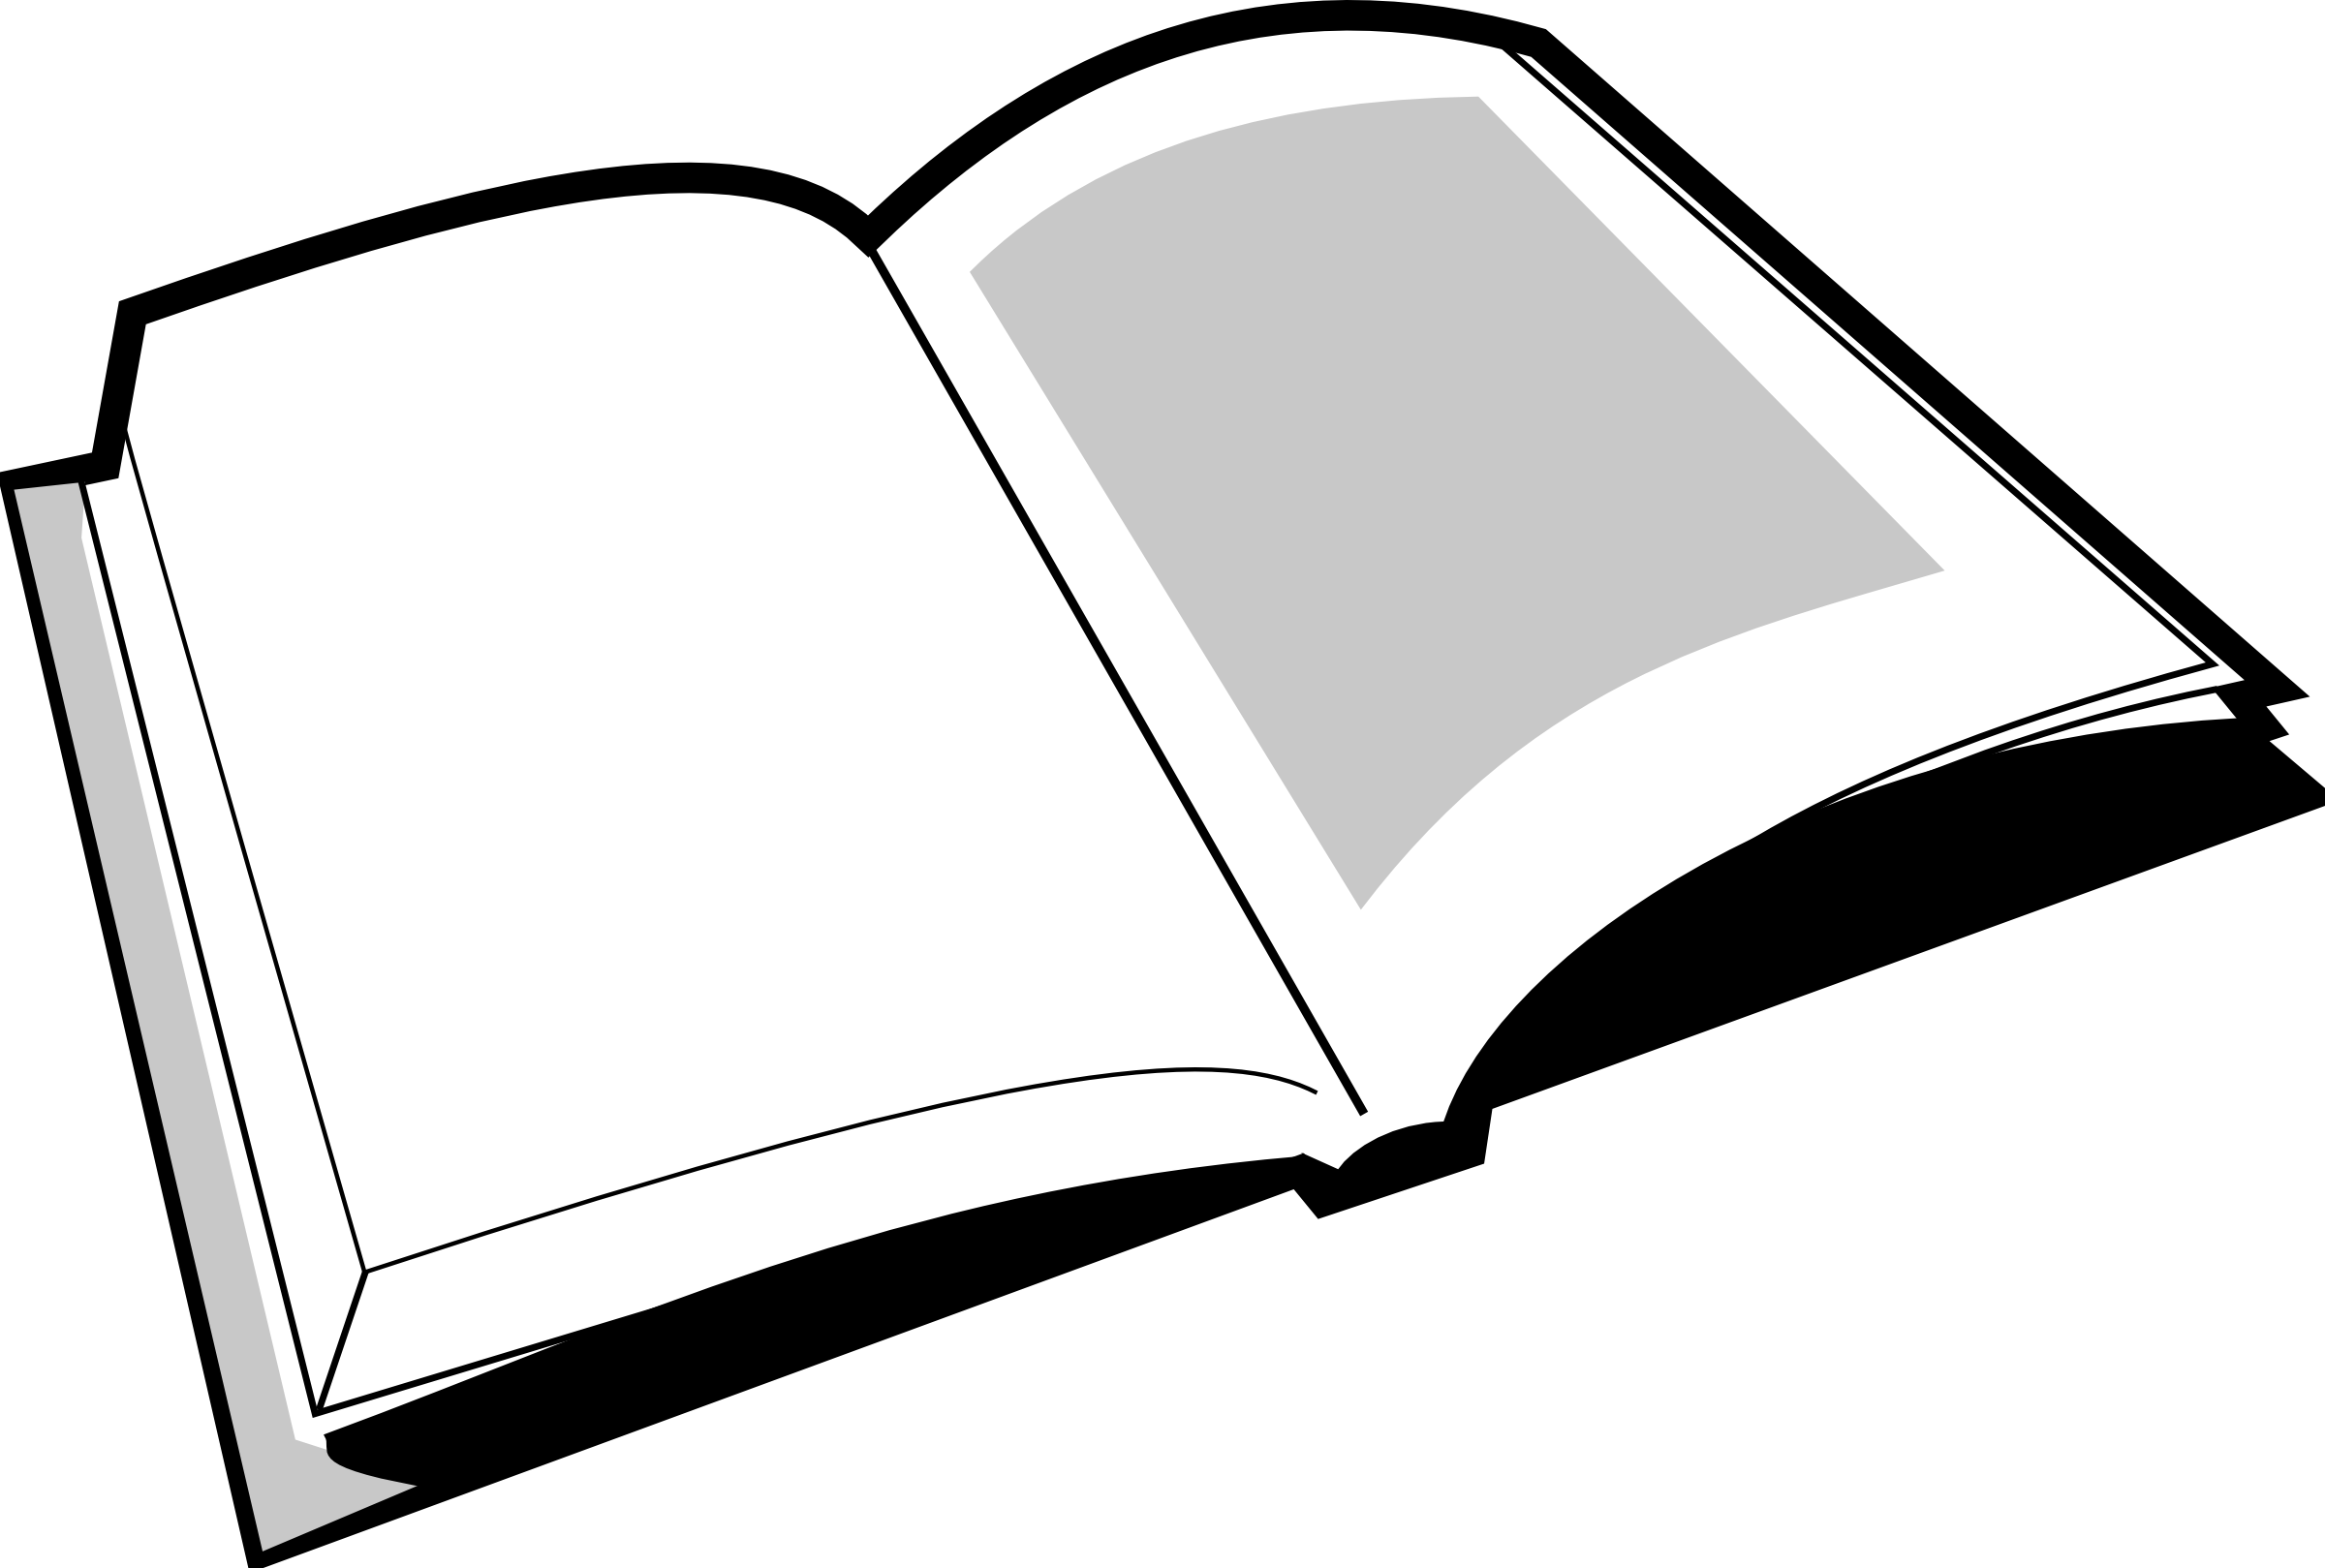 Free clipart stylized book - Cliparting.com